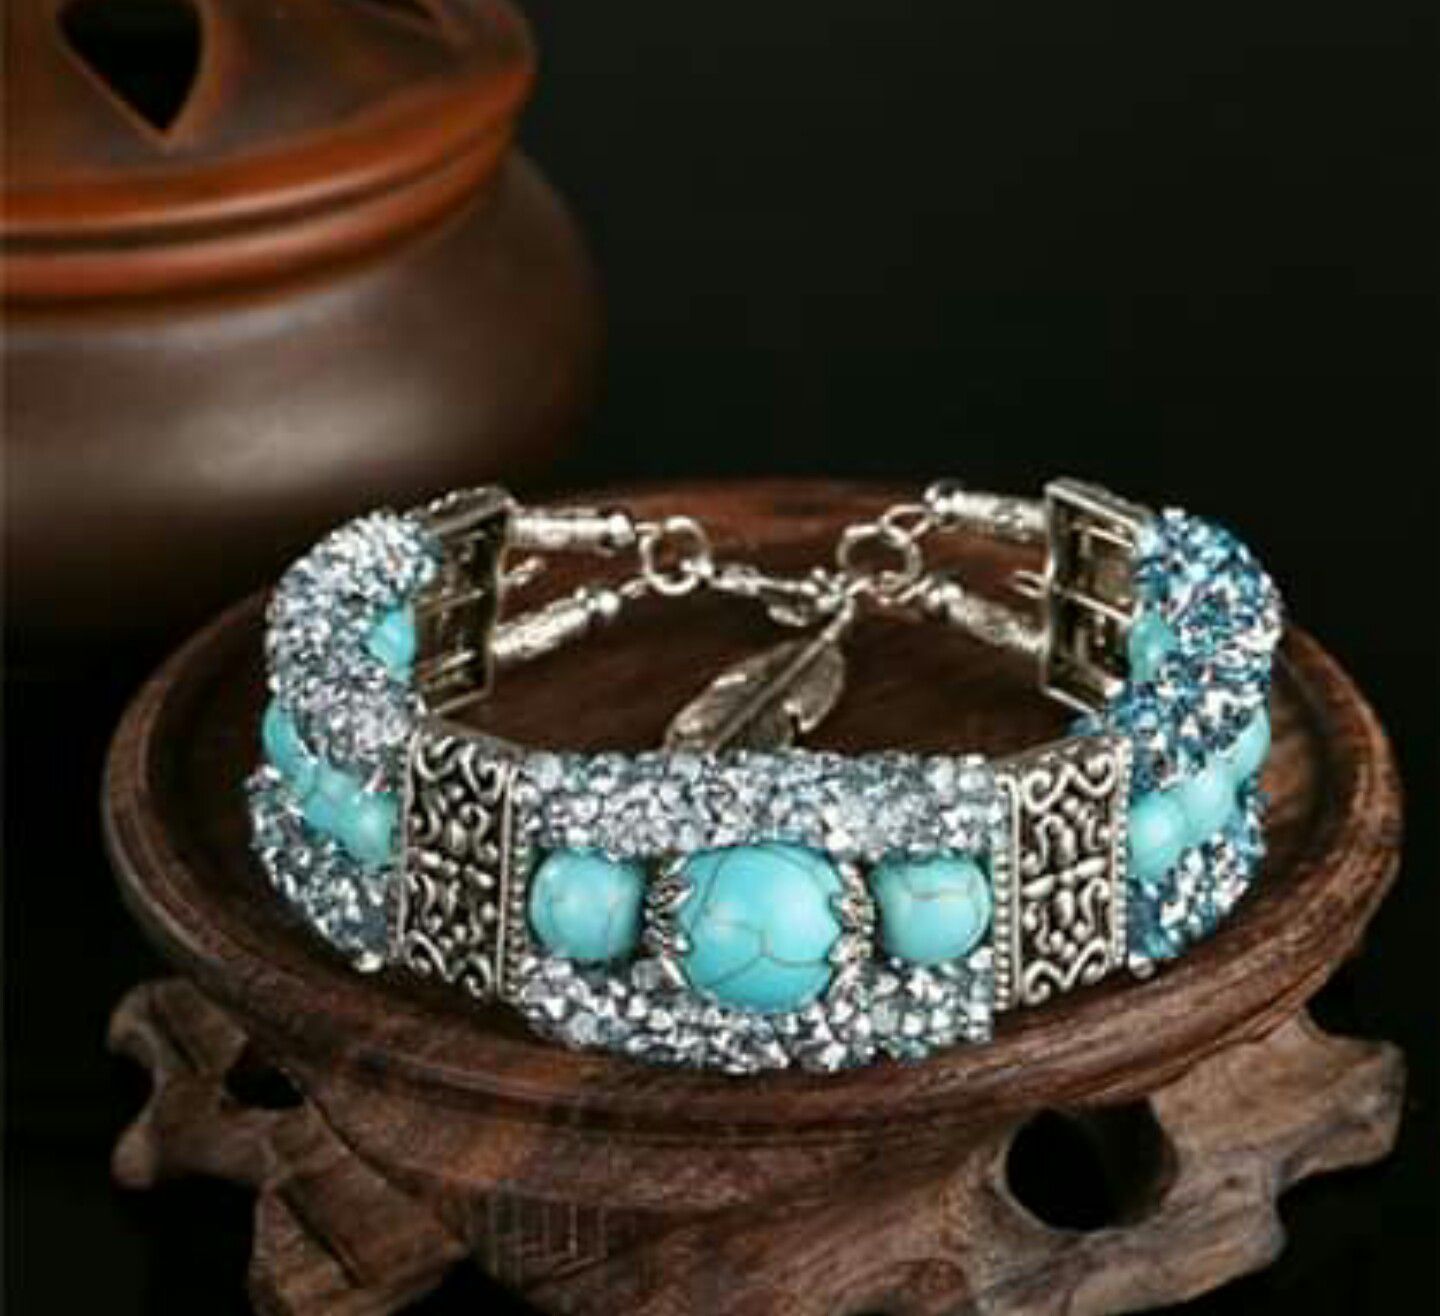 Vintage Bracelet with Turquoise Beads and Tibetan Silver Feather